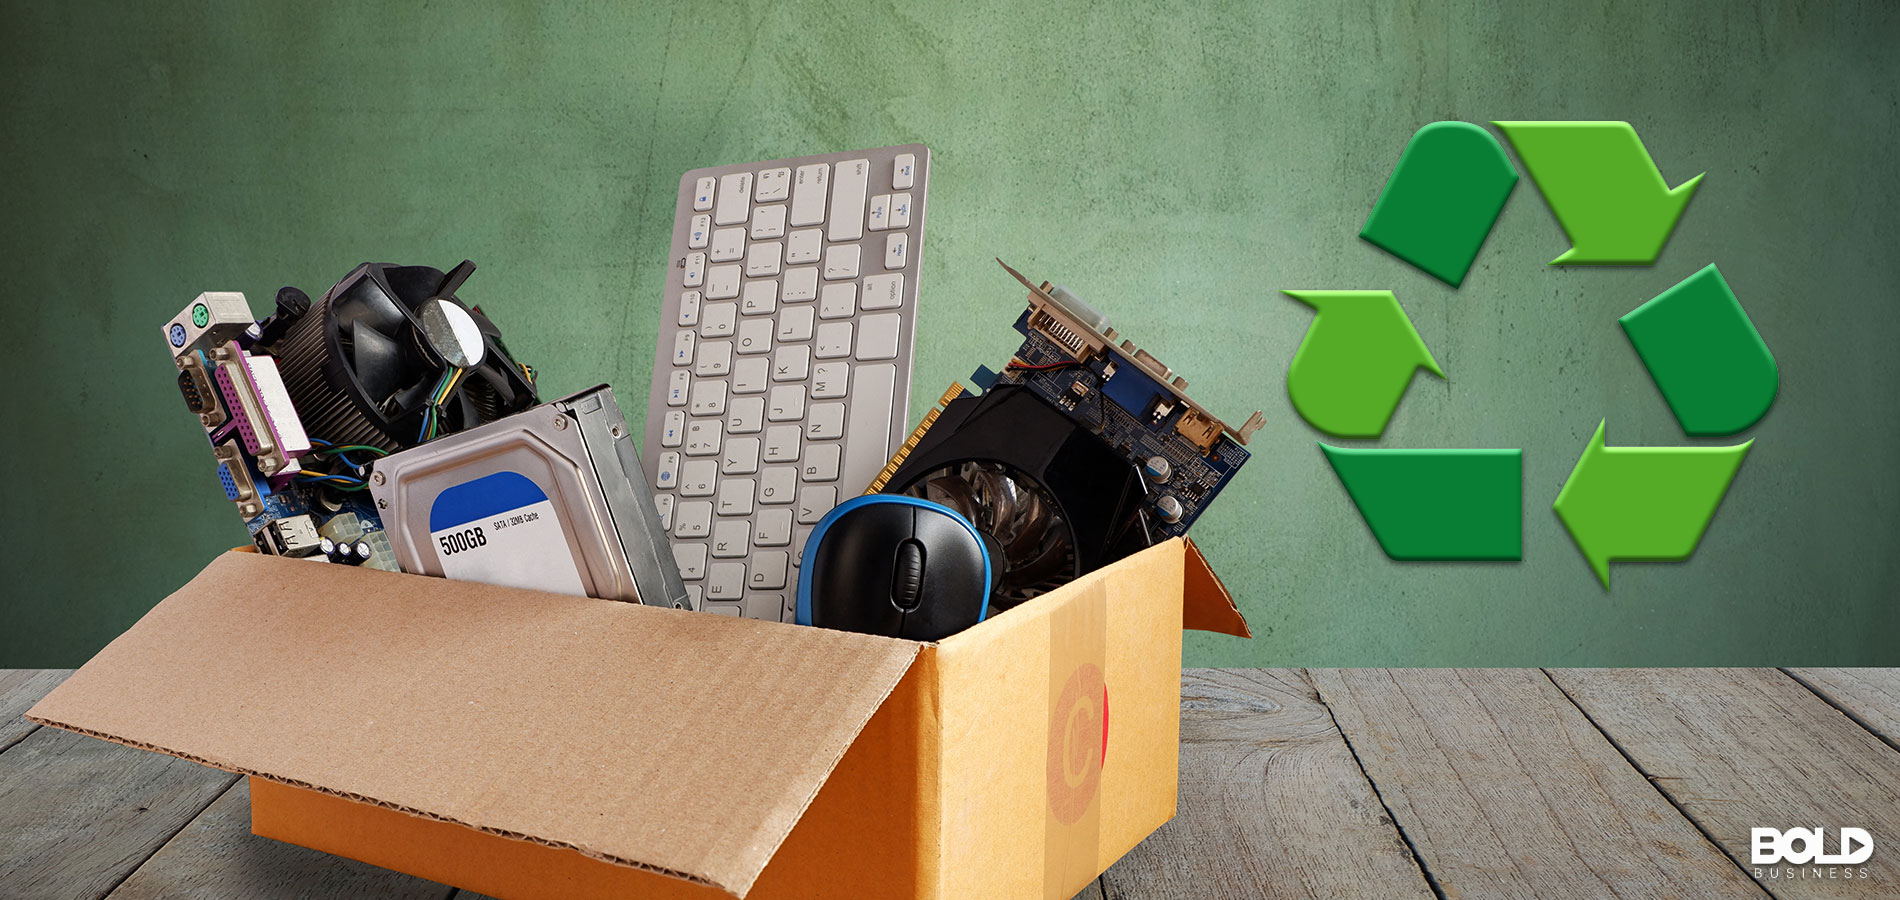 A bunch of old electronics about to recycled